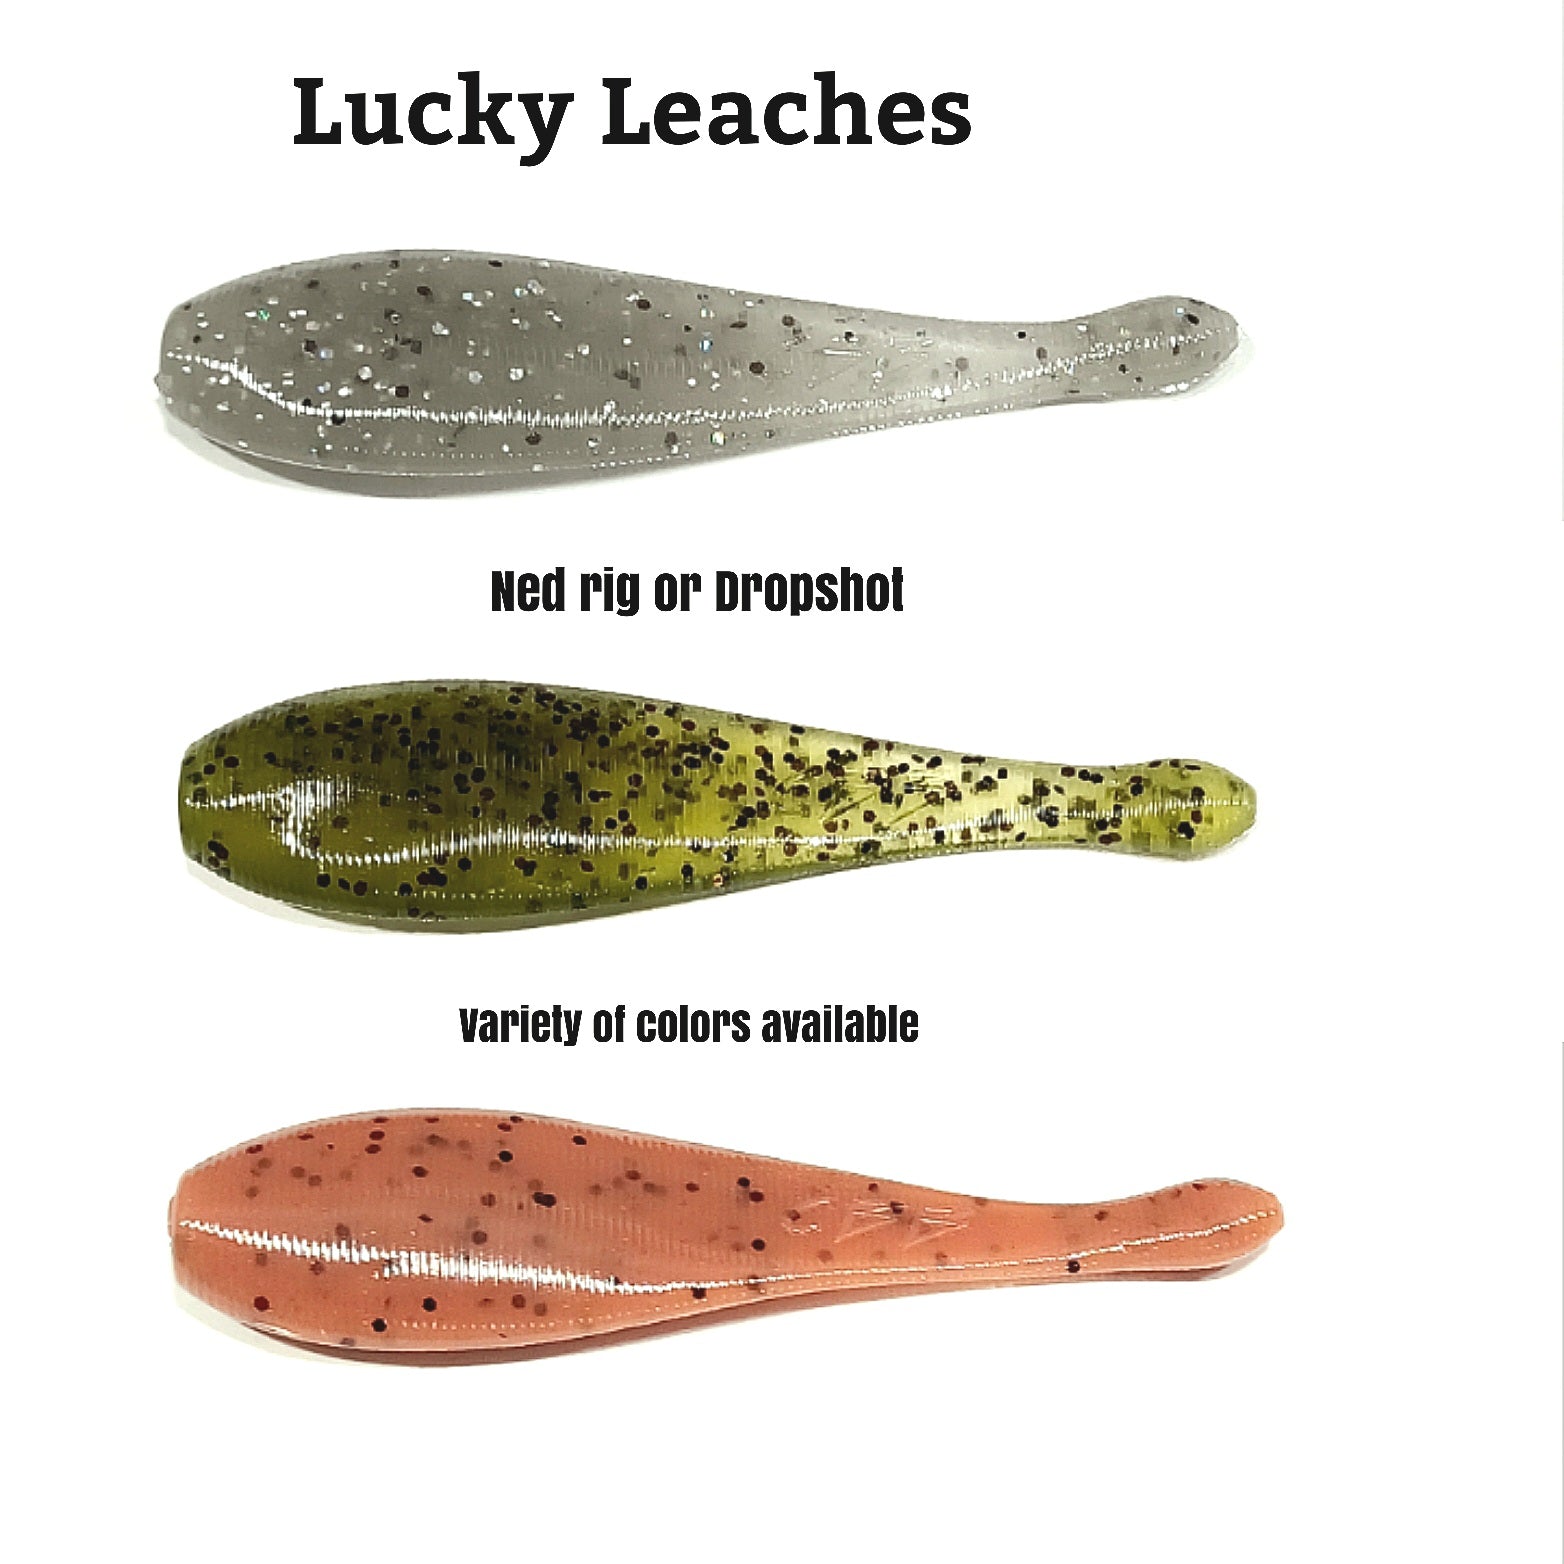 LUCKY LEACH (drop shot or Ned rig them) variety of colors – Cali